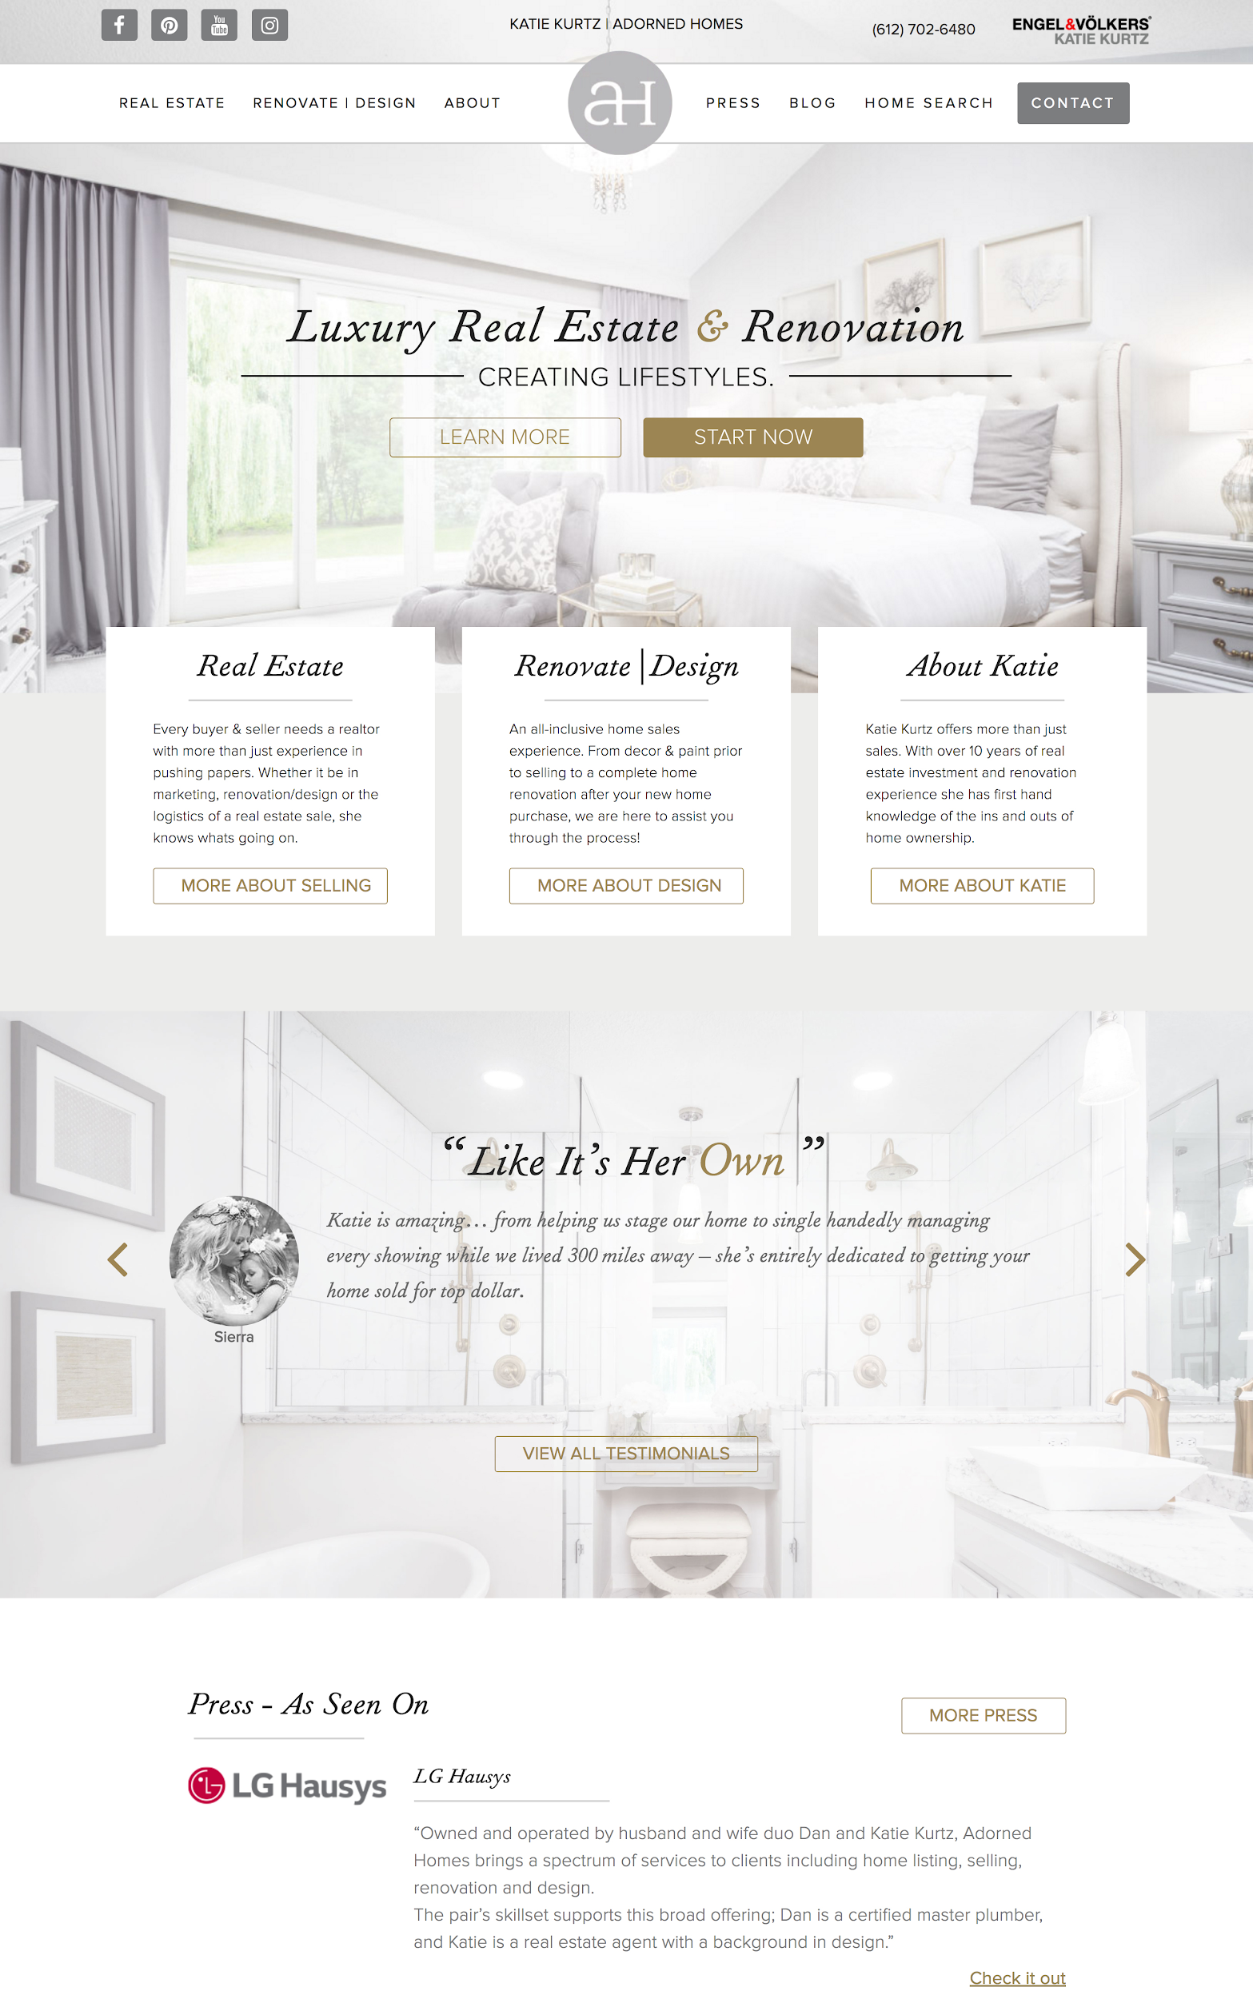 Adorned Homes - Thiết kế website xây dựng